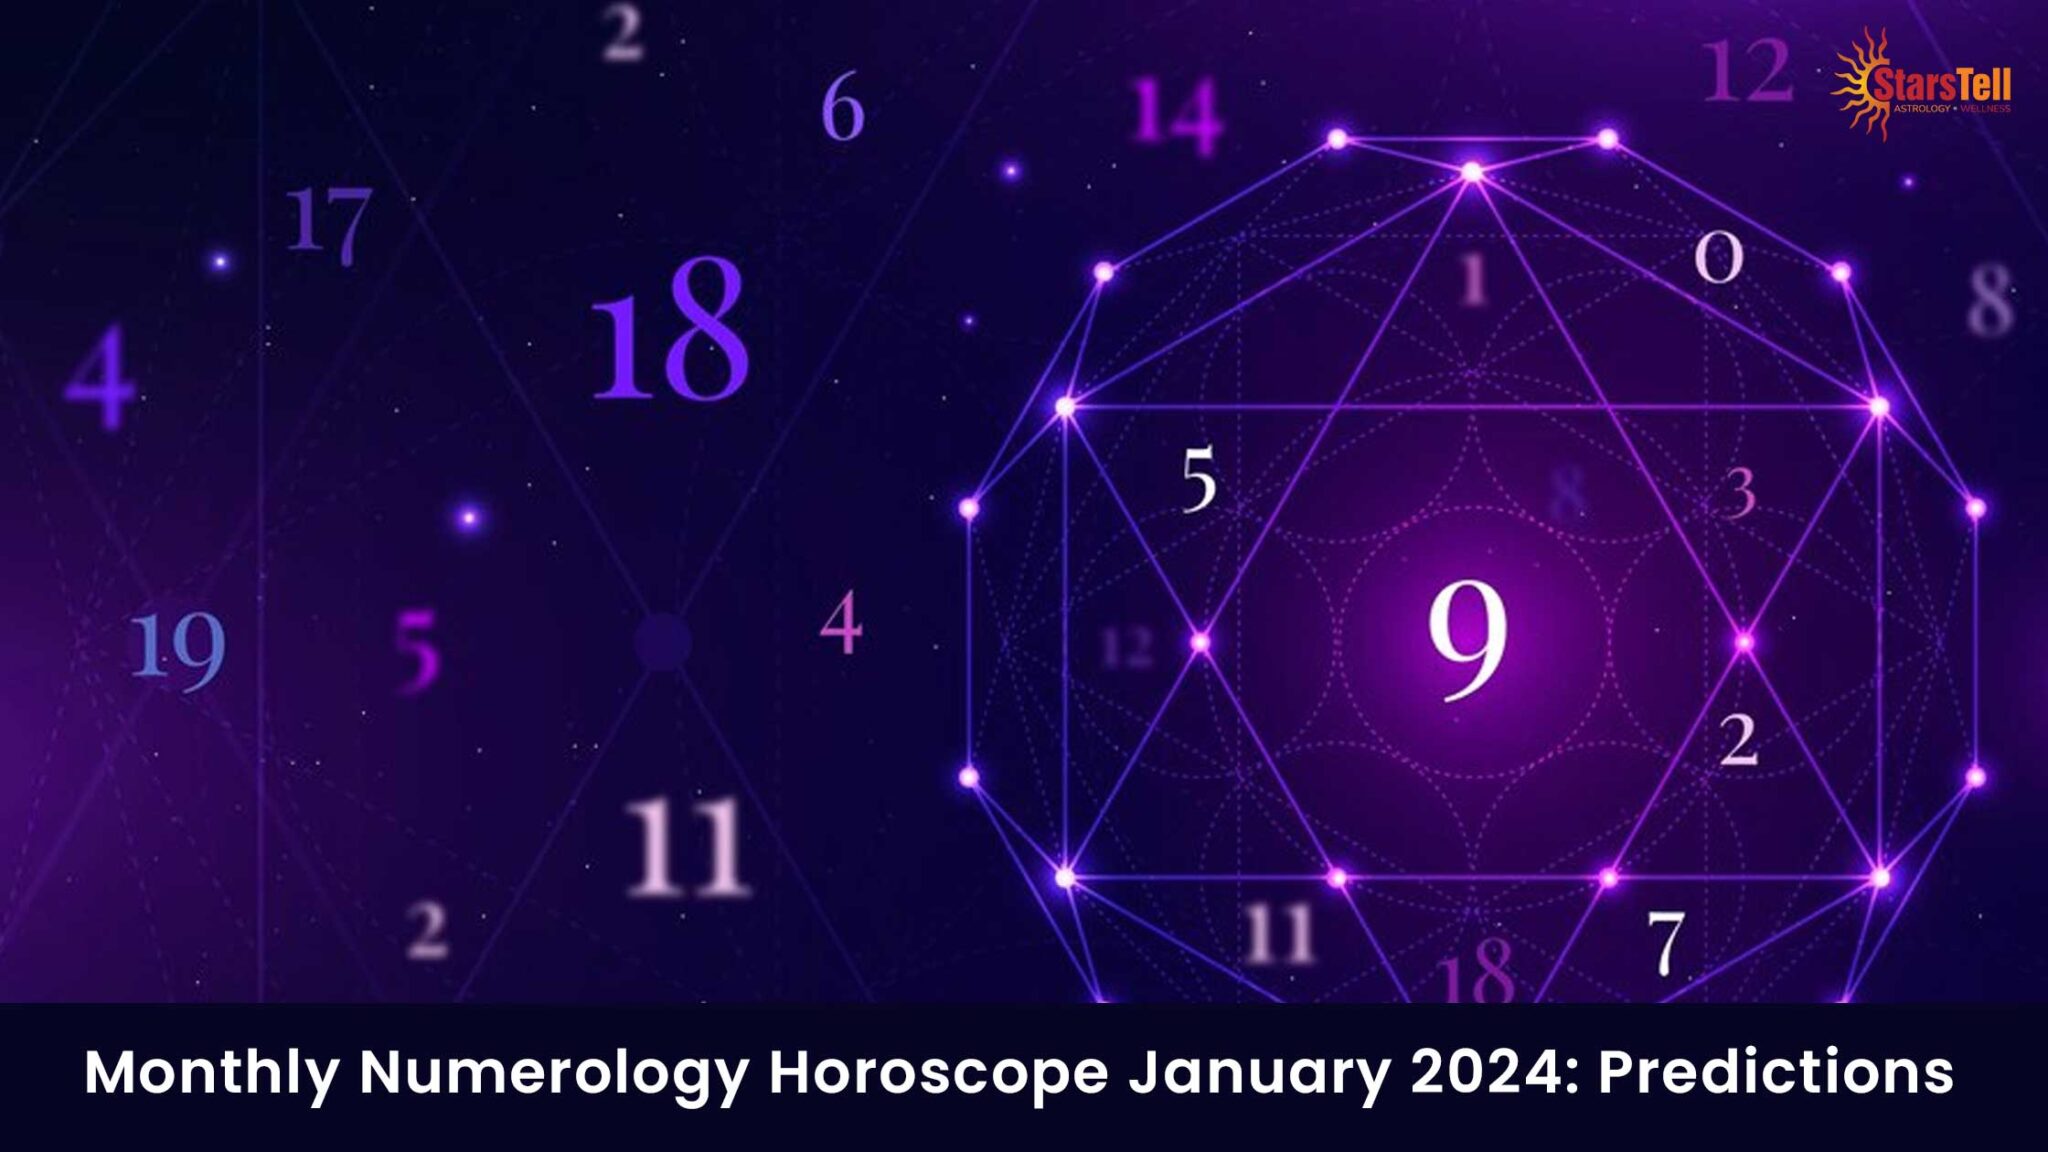 Monthly Numerology Horoscope January 2024 Predictions